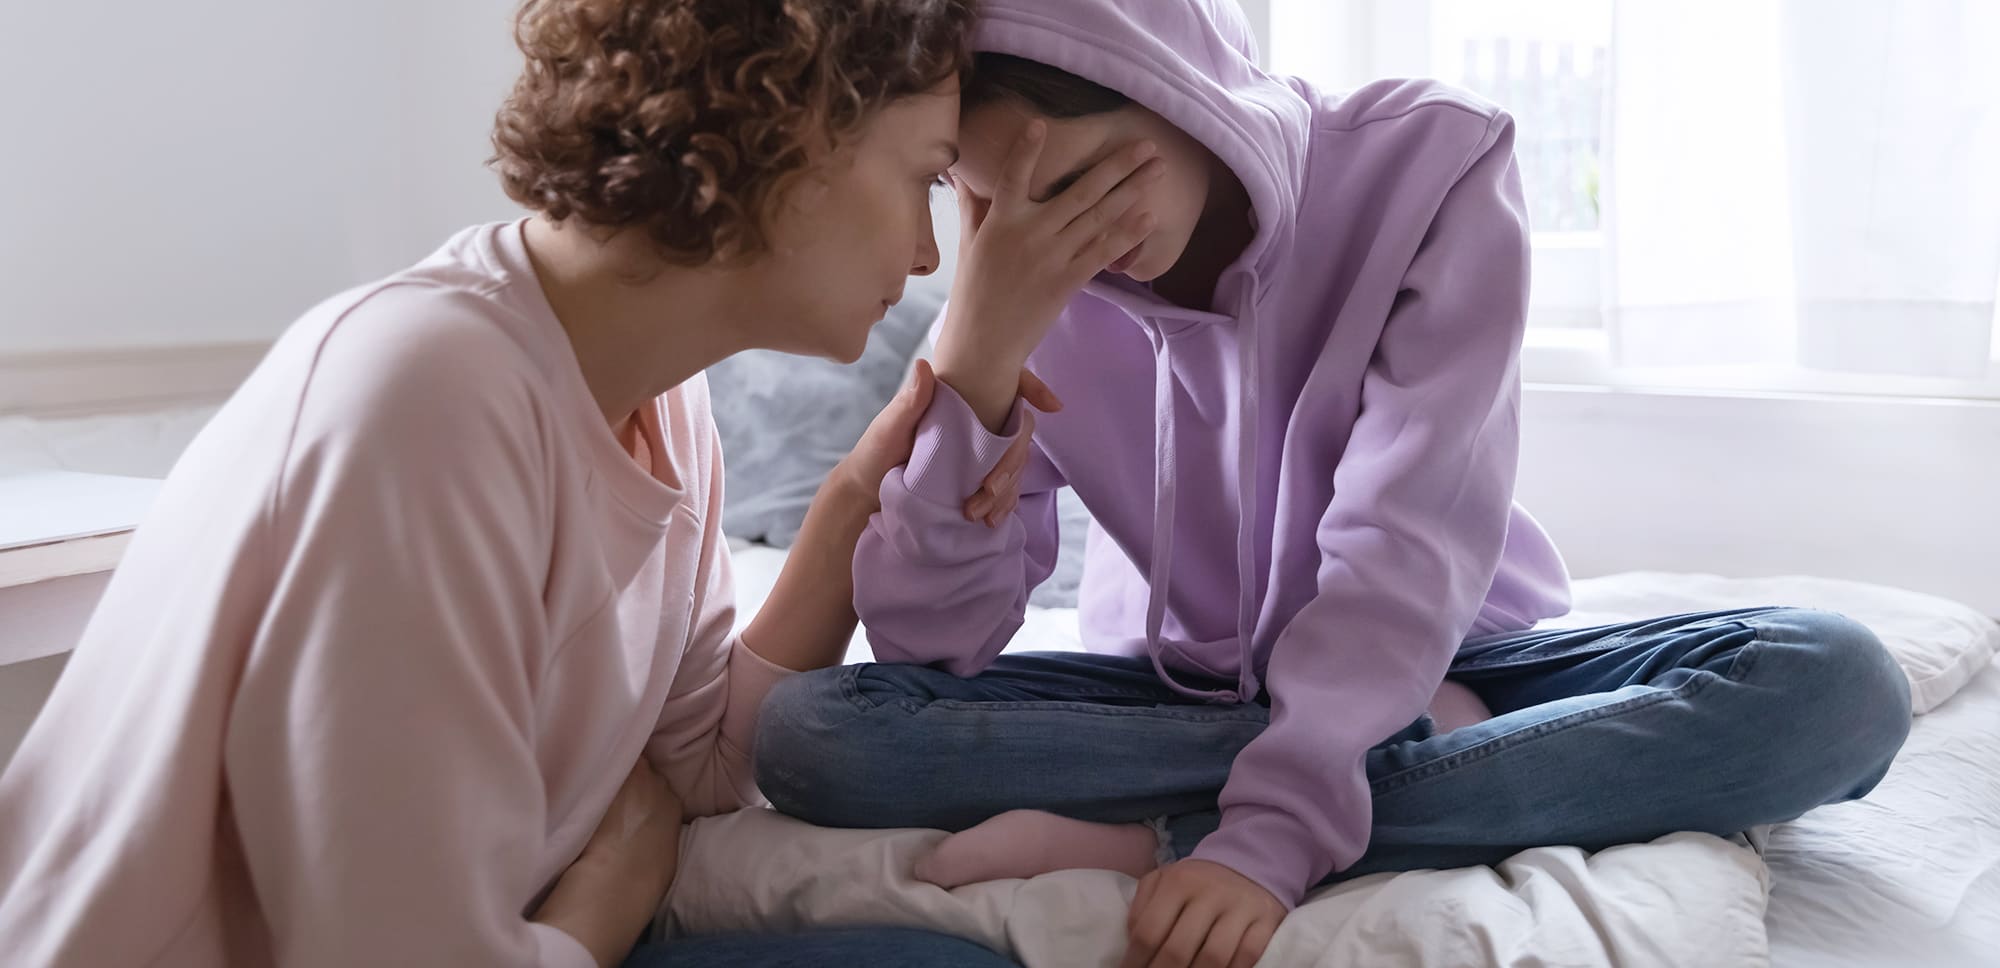 Mother consoling teen who is showing signs of depression.